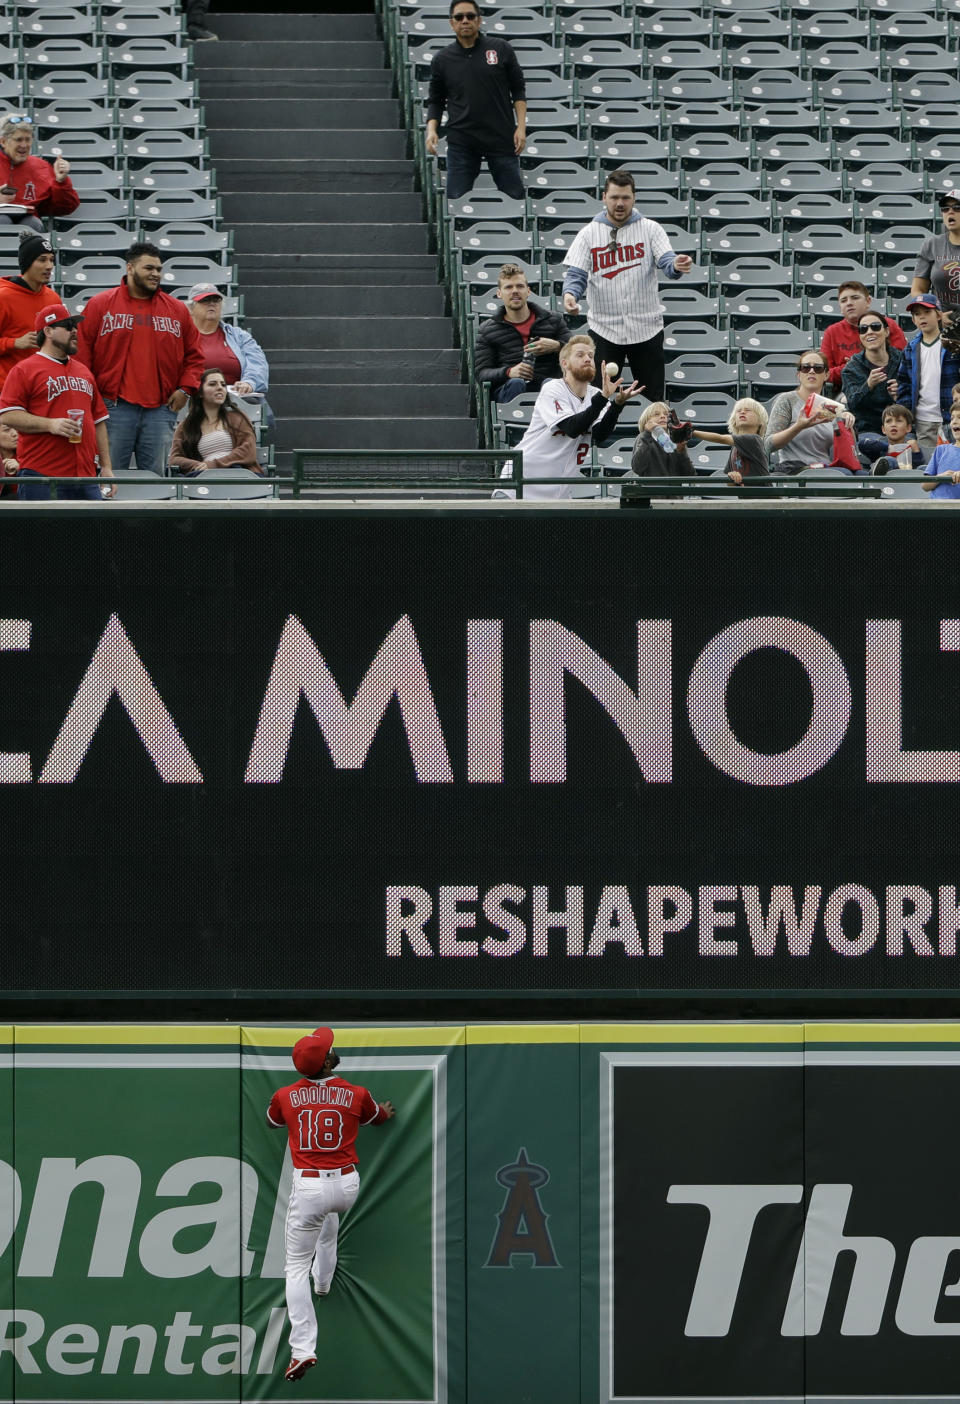 Los Angeles Angels center fielder Brian Goodwin, bottom, watches as a two-run home run by Minnesota Twins' Jorge Polanco goes over the wall during the second inning of a baseball game Thursday, May 23, 2019, in Anaheim, Calif. (AP Photo/Marcio Jose Sanchez)